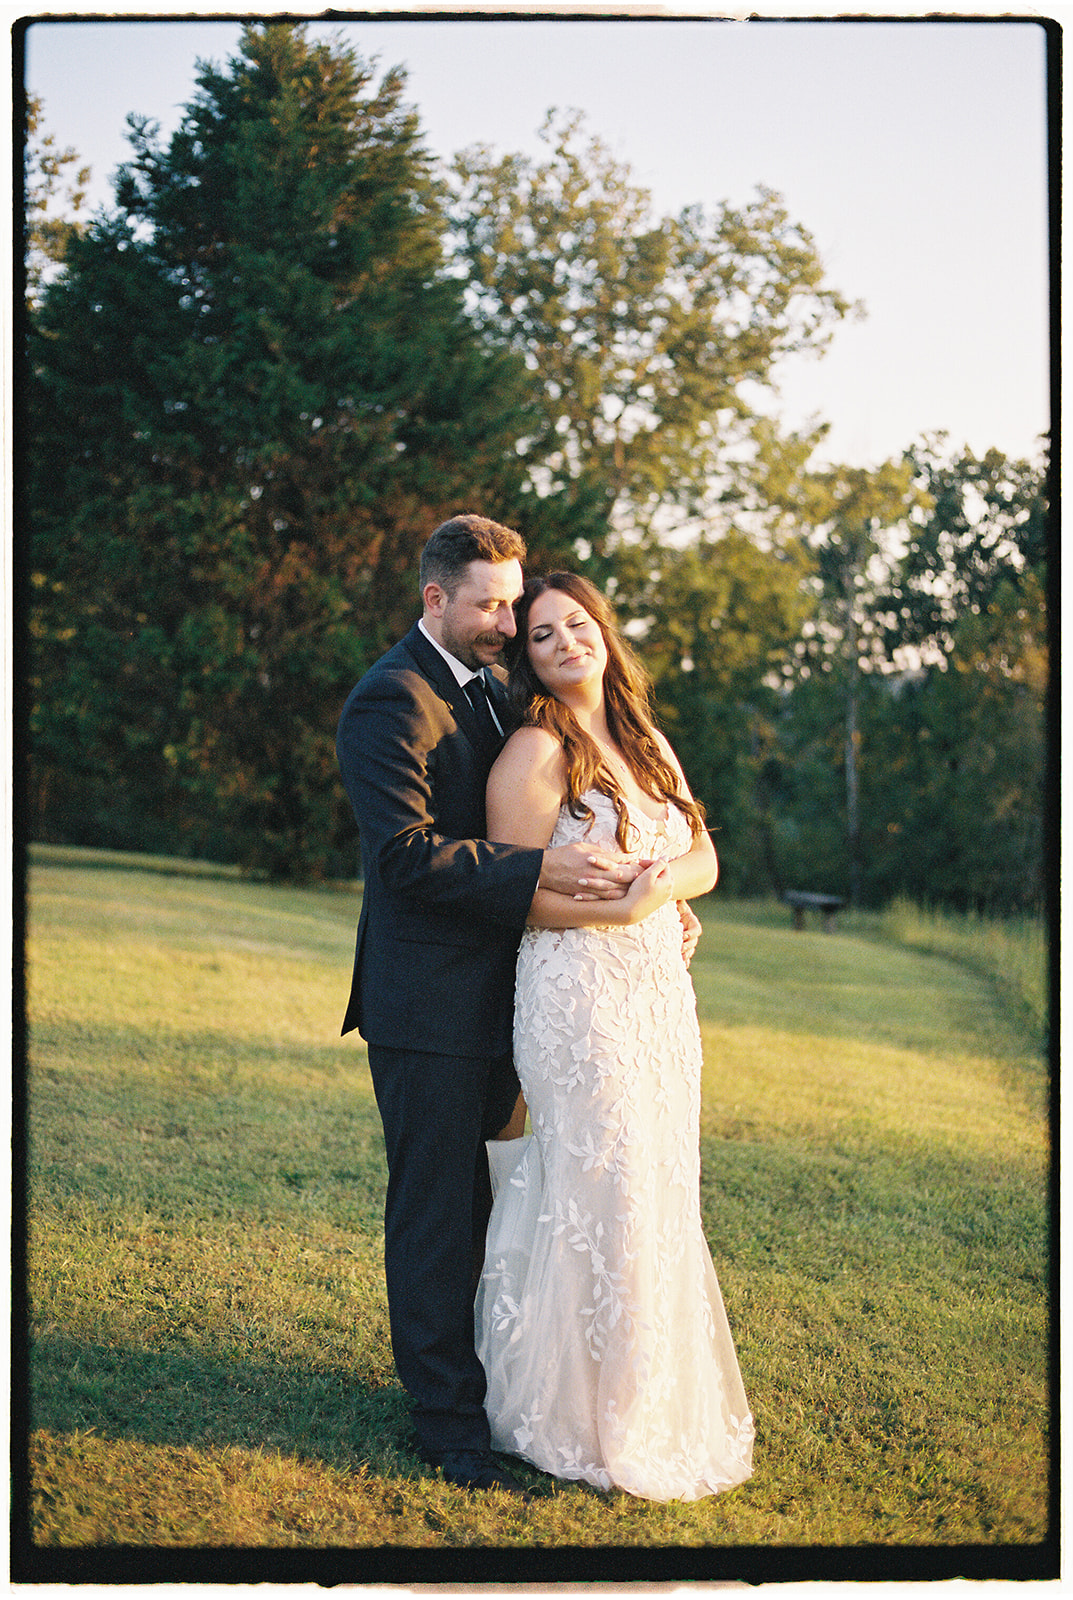 A groom hugs his bride from behind as she leans onto him in a lawn at sunset at their Firefly Lane Chapel wedding